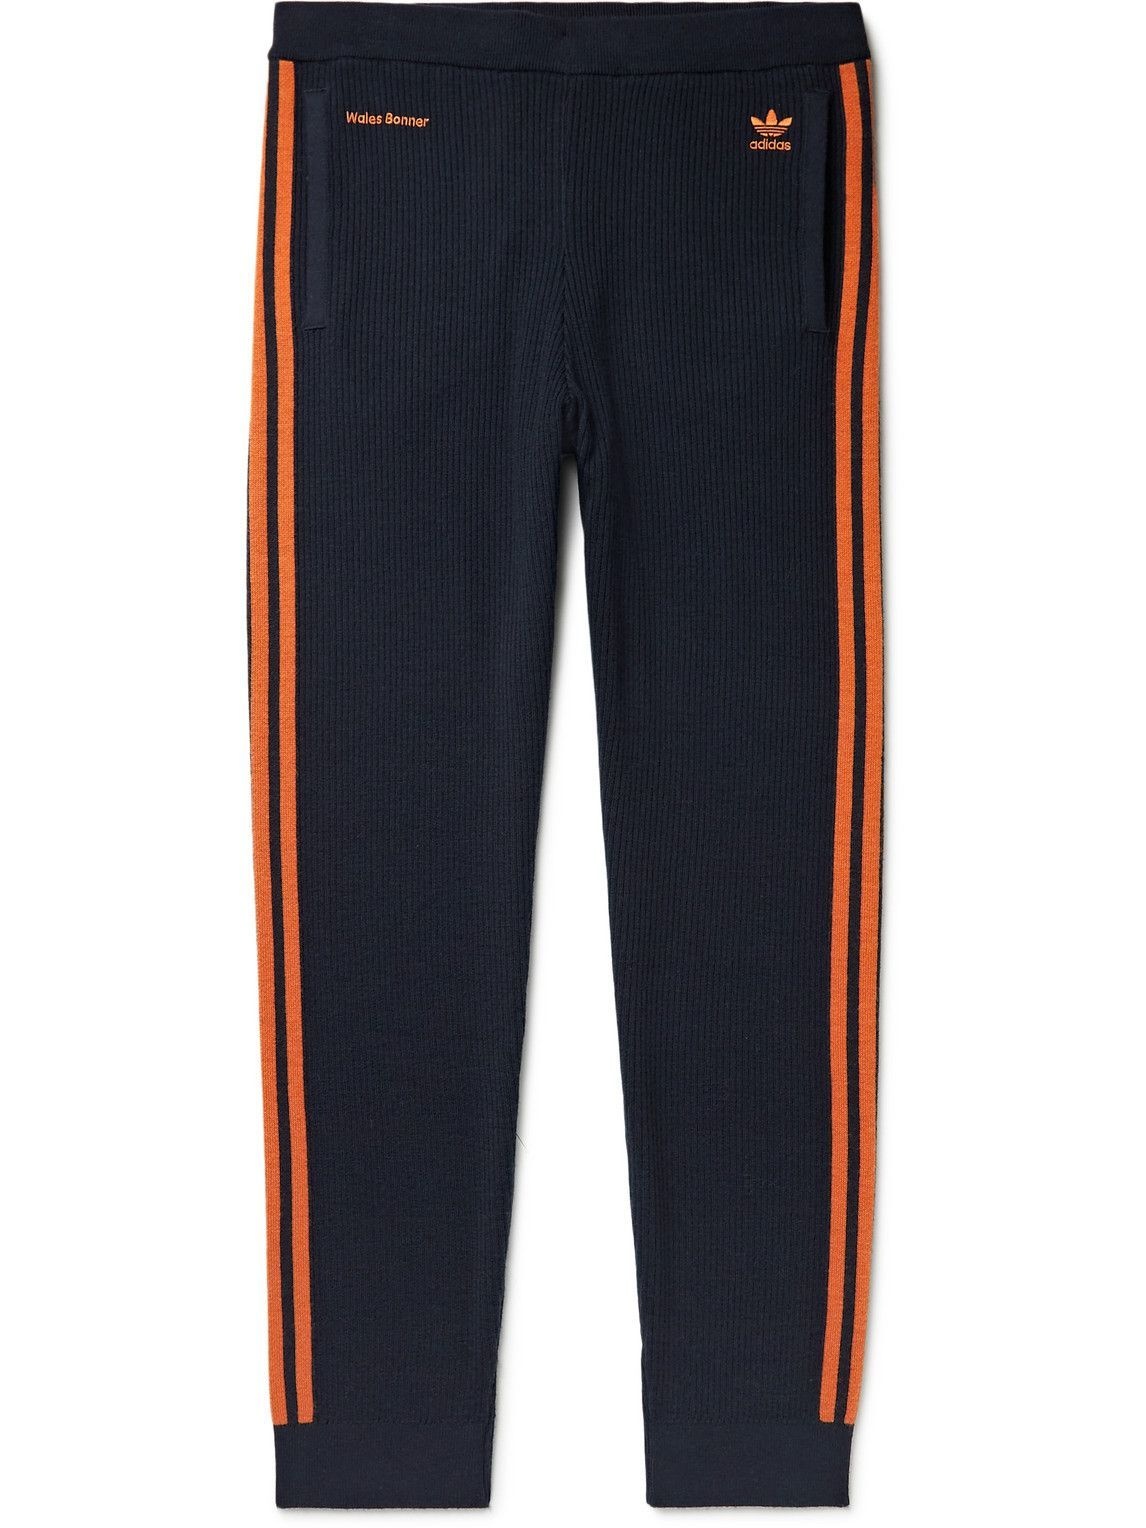 Photo: adidas Consortium - Wales Bonner Tapered Striped Ribbed Wool-Blend Sweatpants - Blue